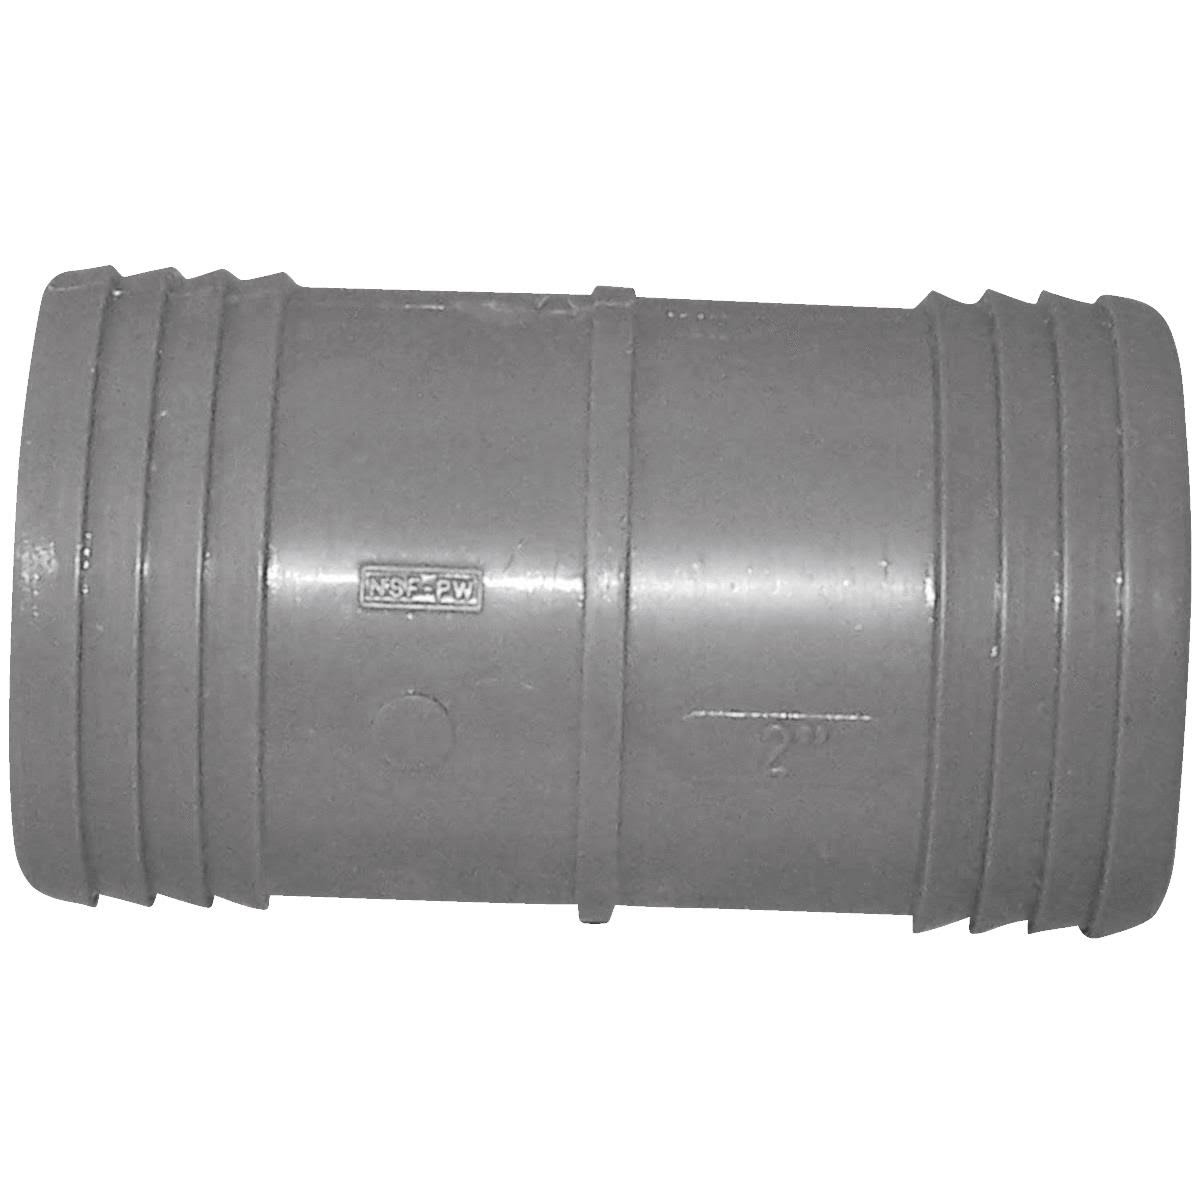 Genova Products Poly Insert Coupling